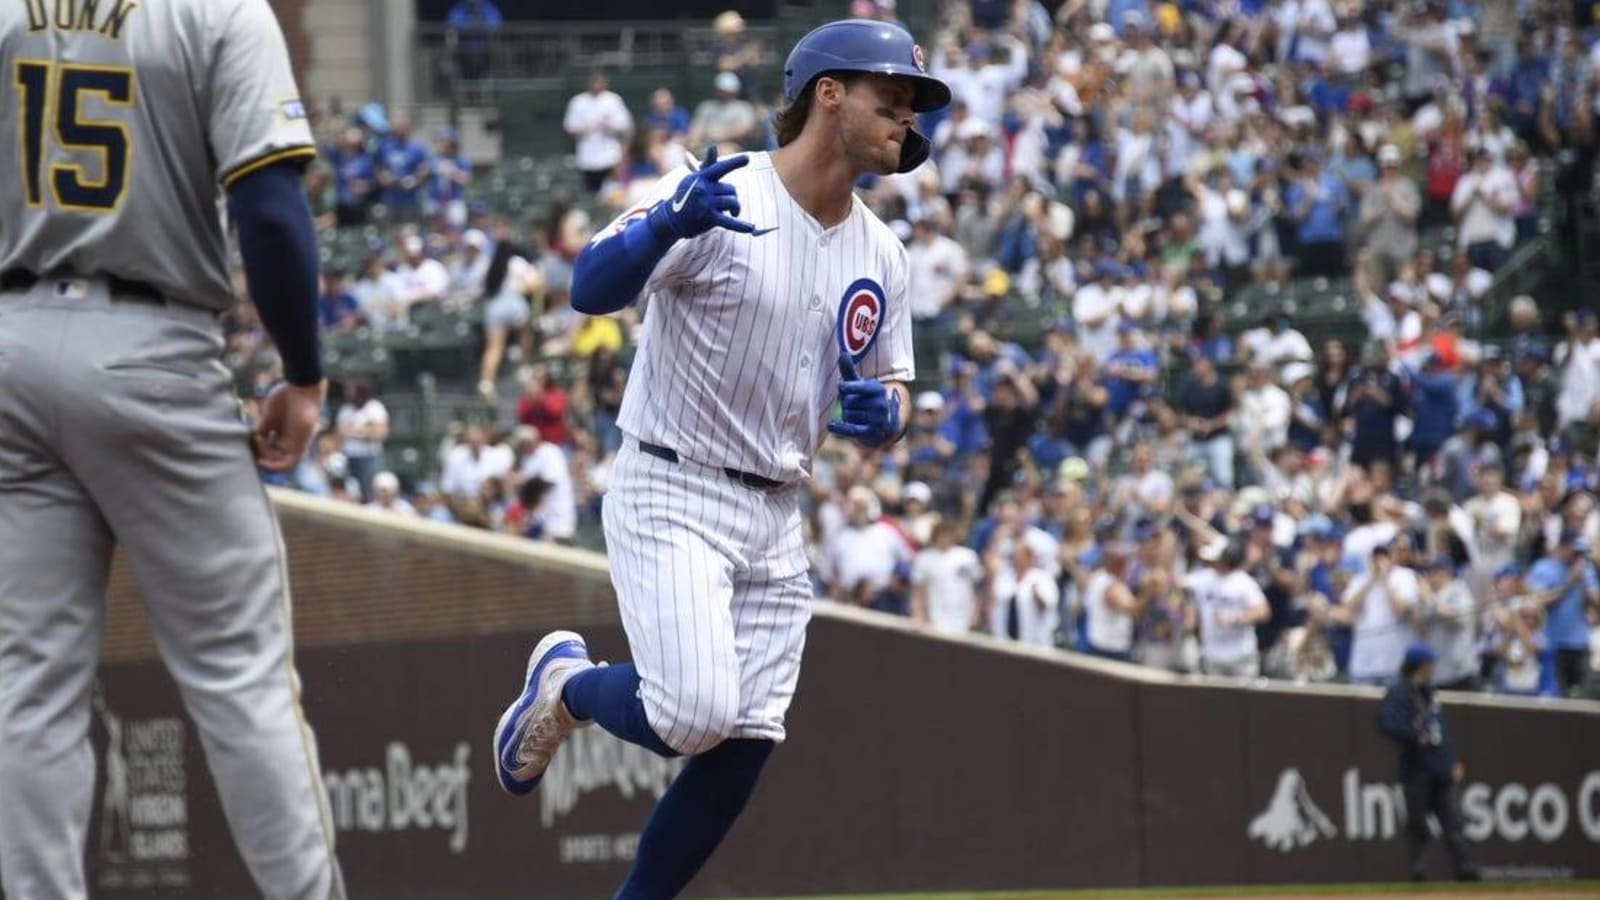 Cubs fend off late rally in 6-5 win over Brewers